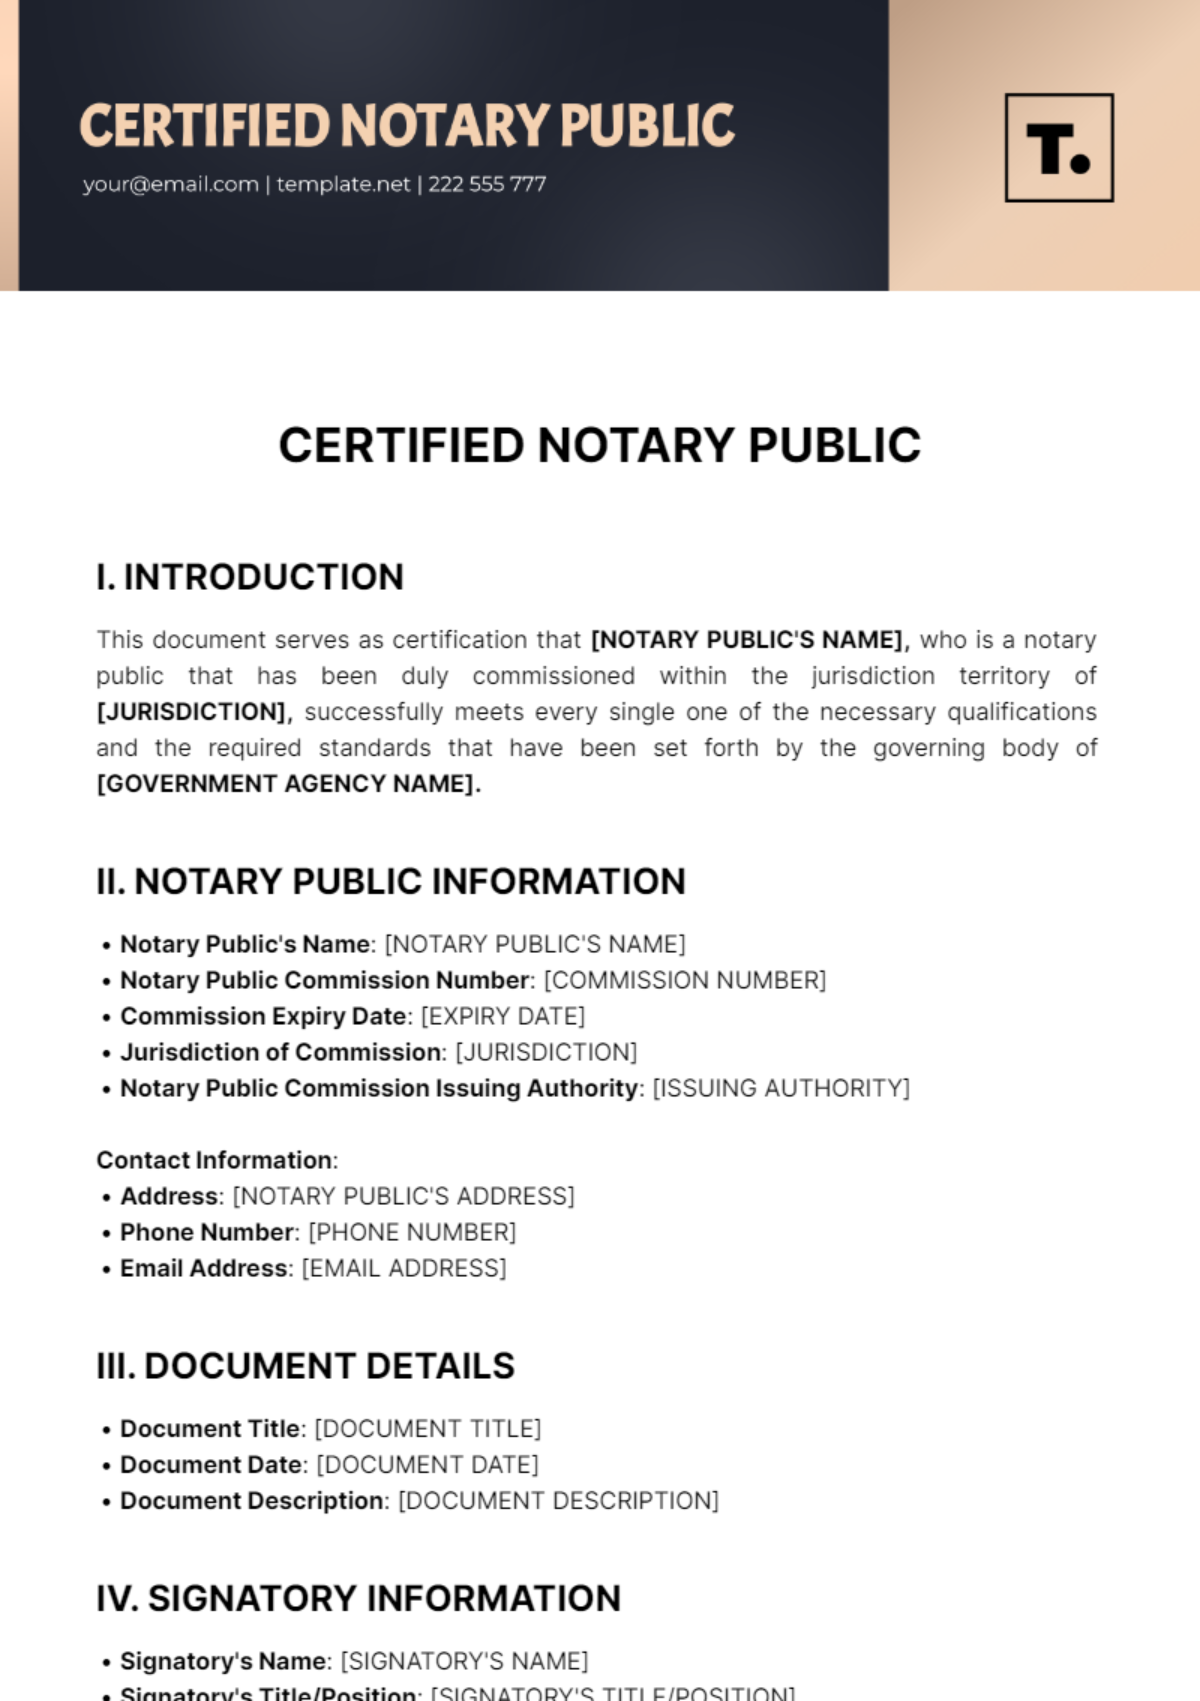 Certified Notary Public Template